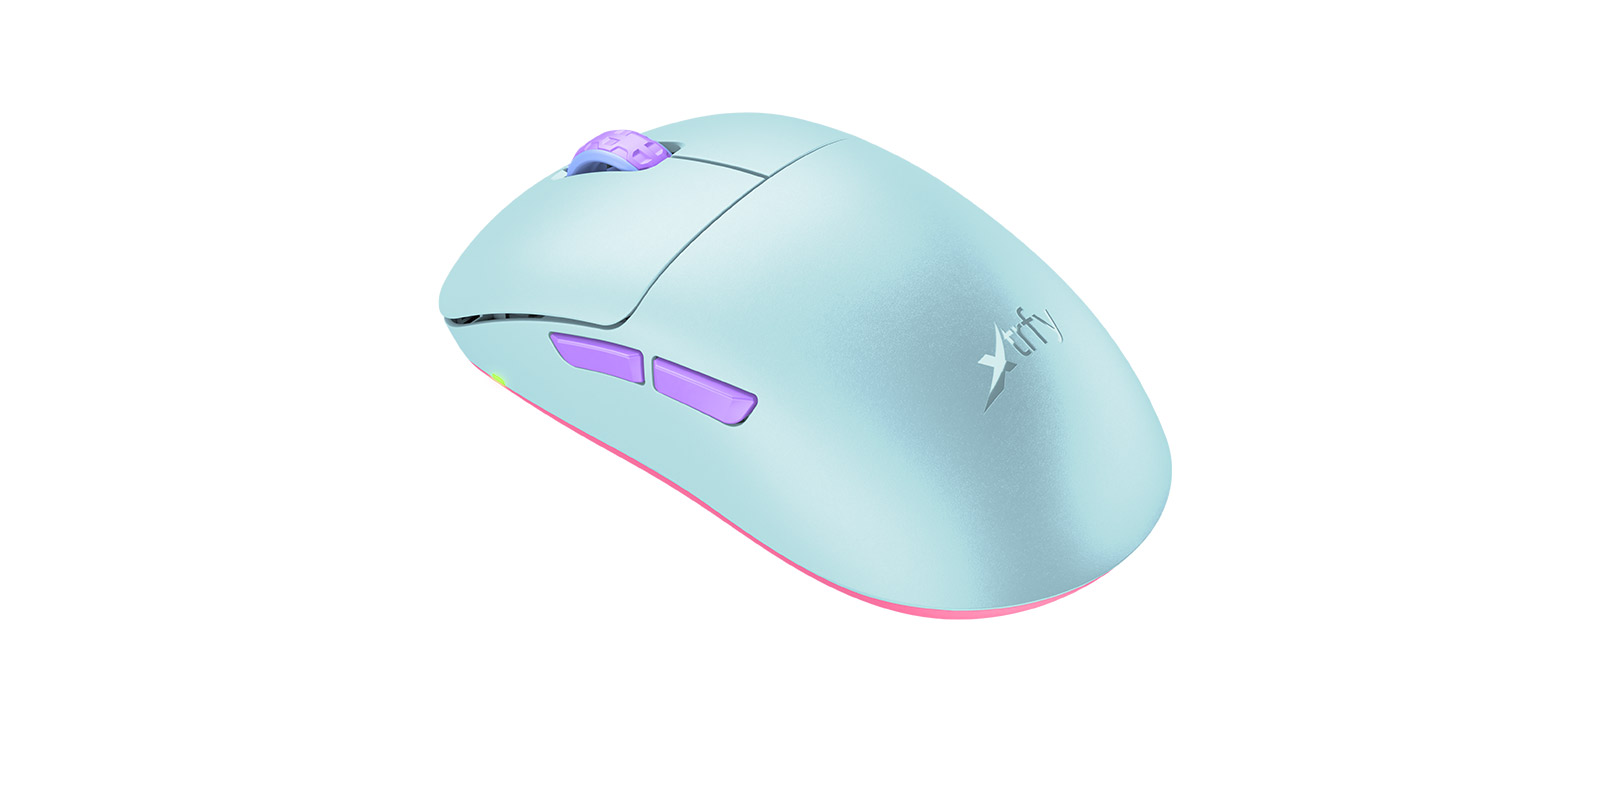 M8-Wireless-Frosty-Mint-Gaming-Mouse_Angle.jpg